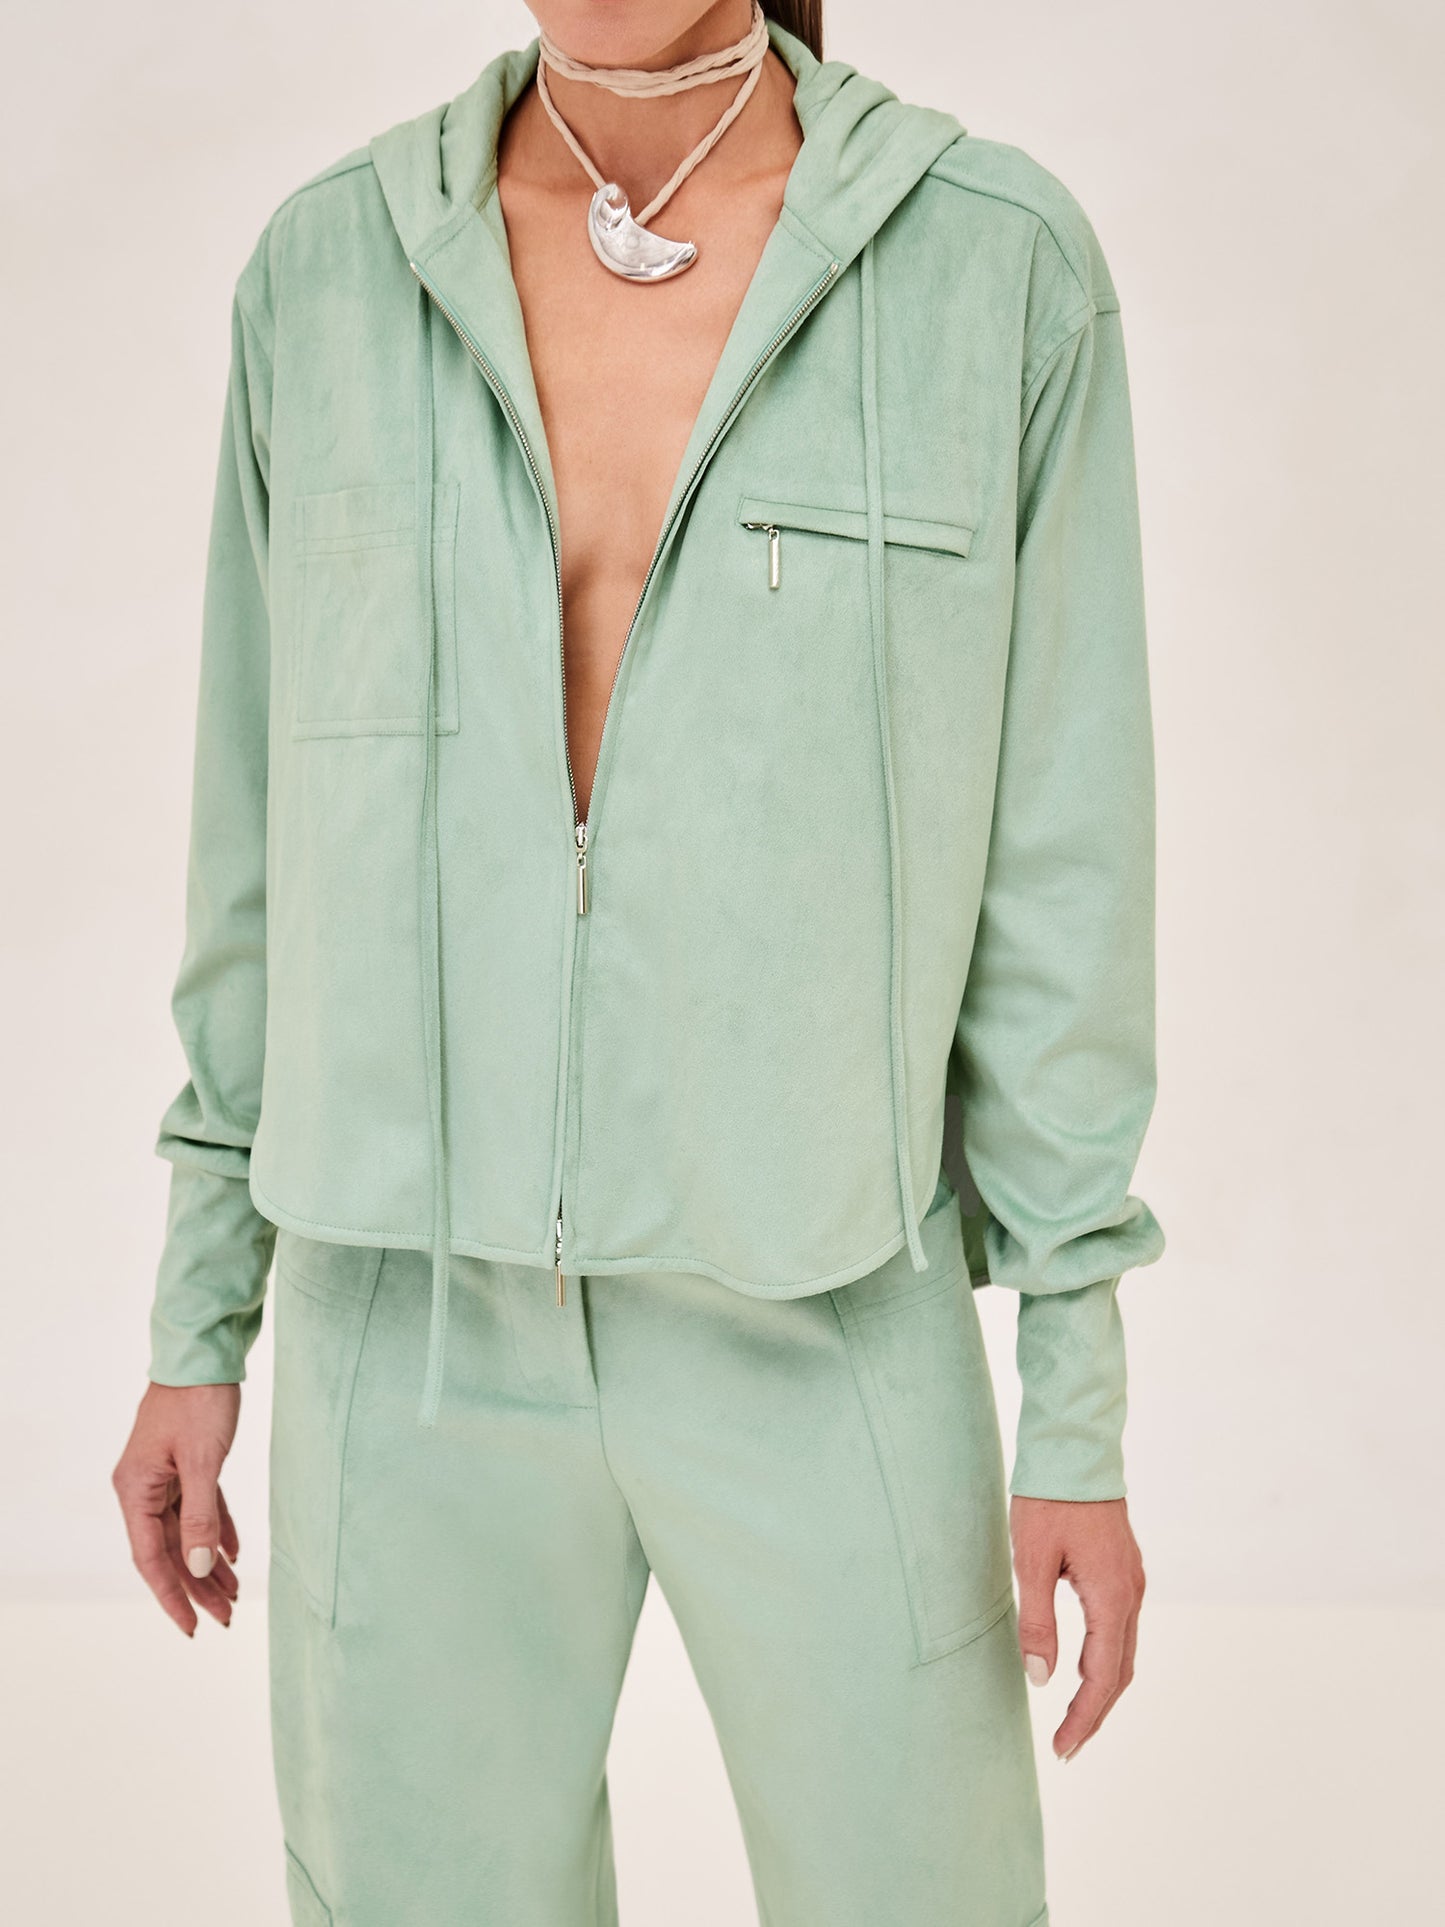 ALEXIS Suda top in sage with zipper and hood. 